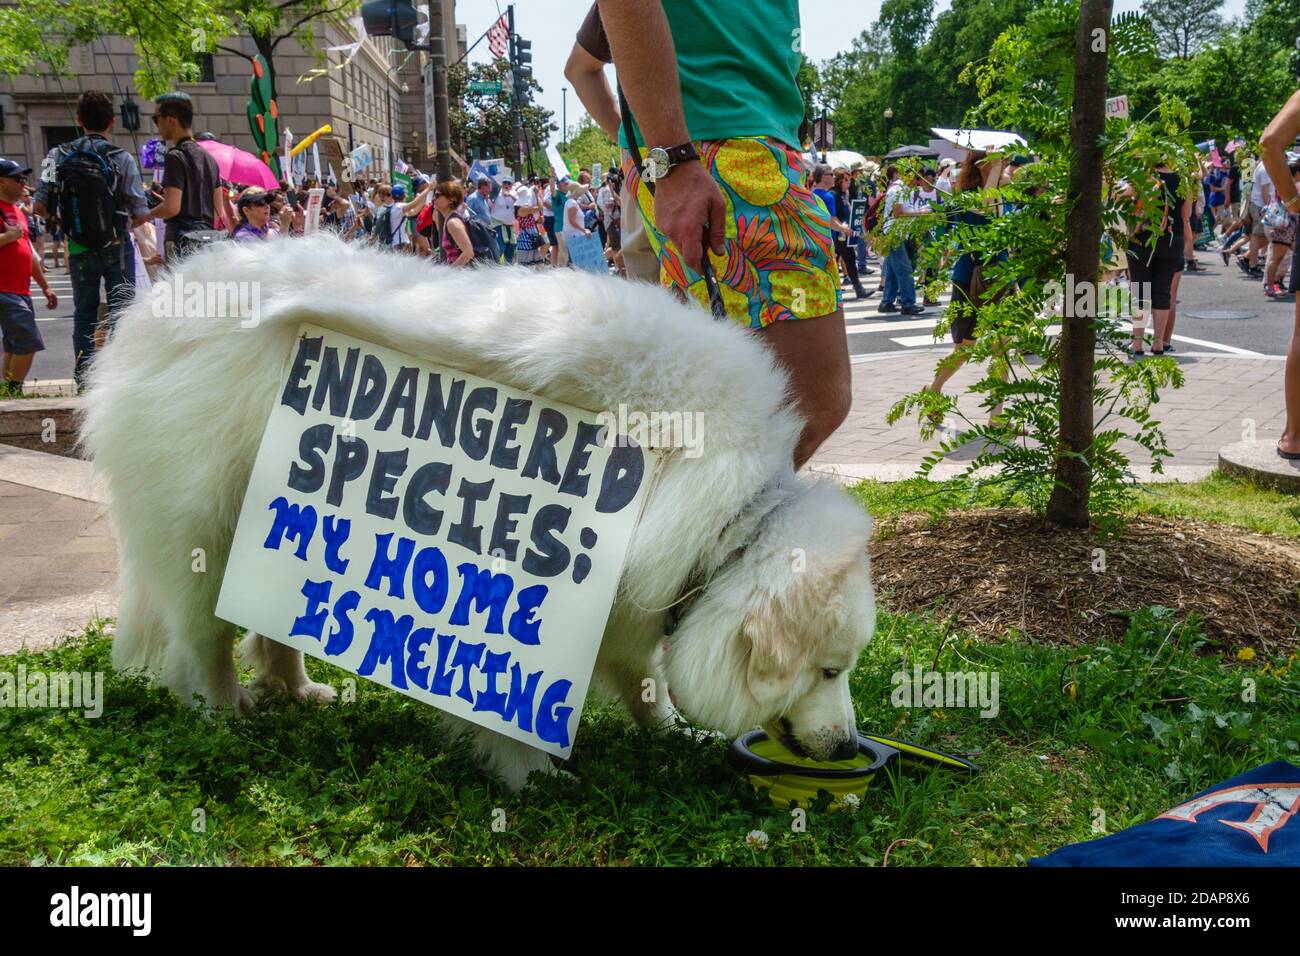 Protesters hold signs at climate change demonstration in Washington, DC, USA. Stock Photo